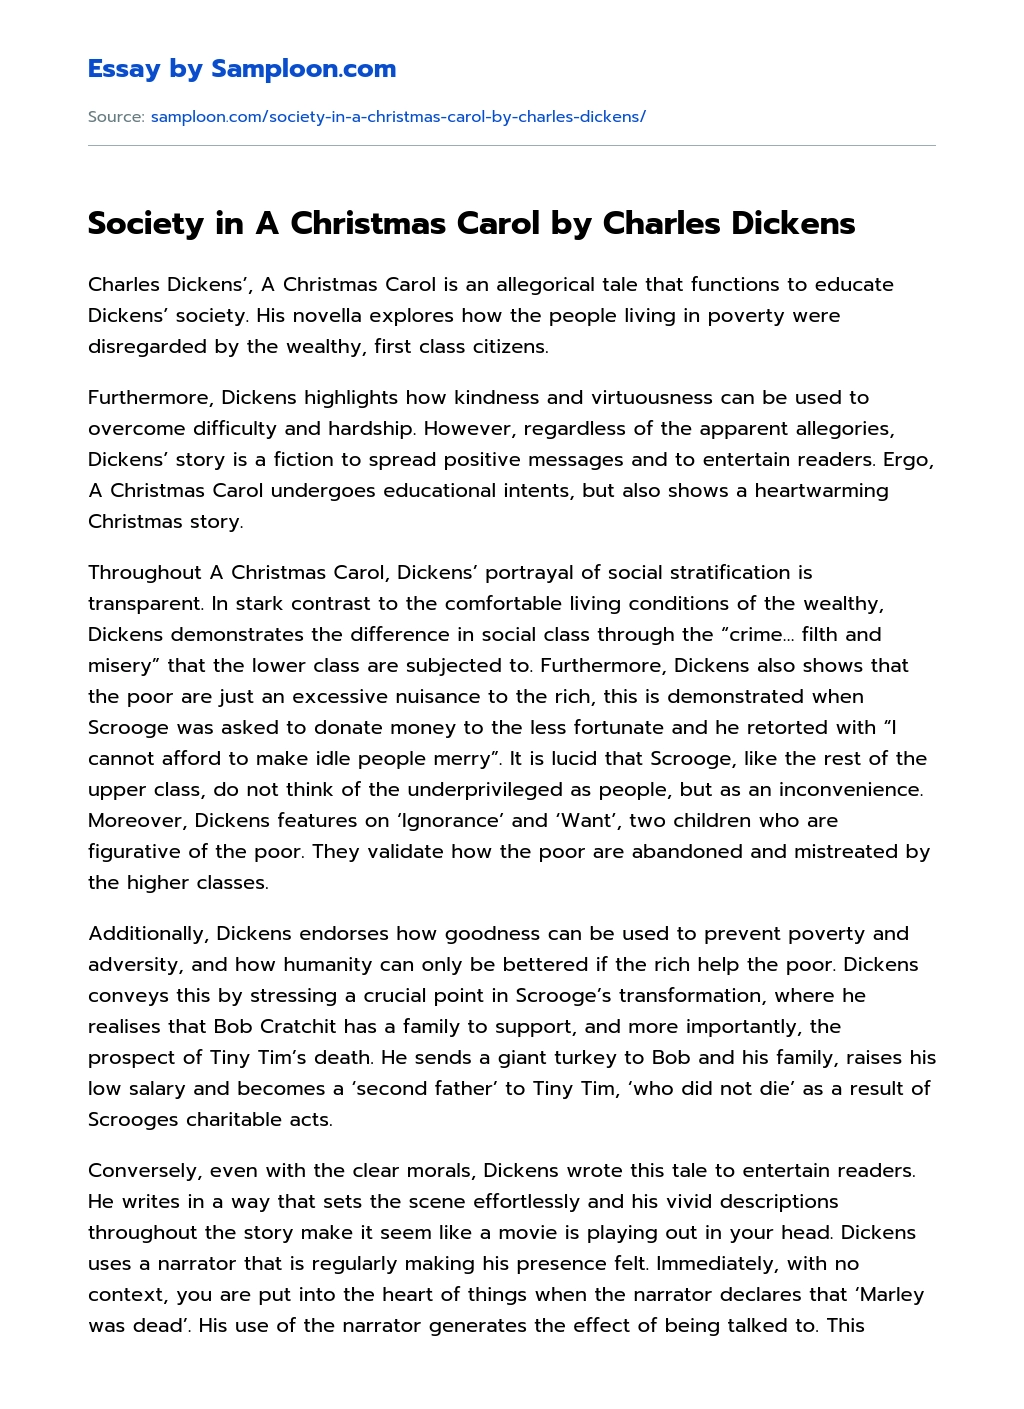 Society in A Christmas Carol by Charles Dickens essay